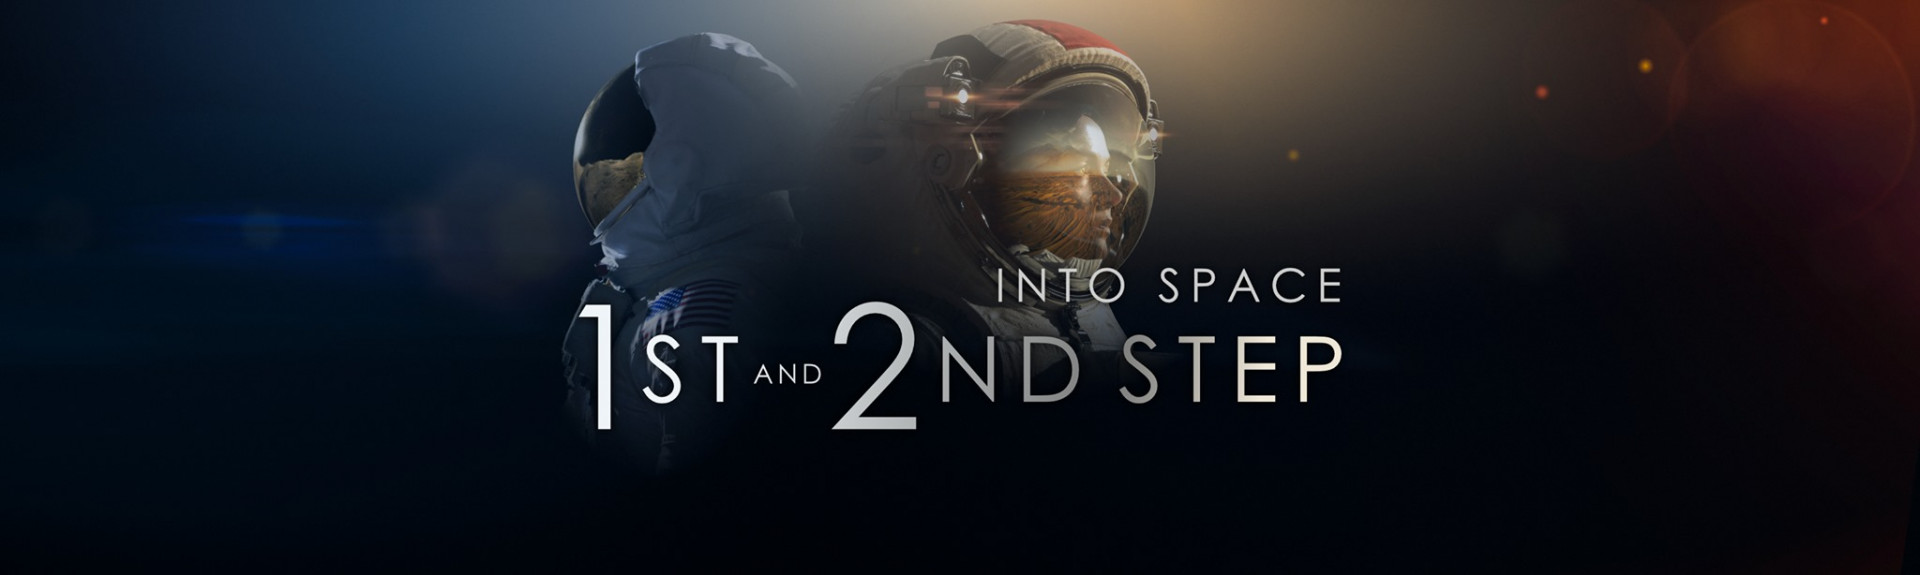 Into Space - 1st & 2nd Step